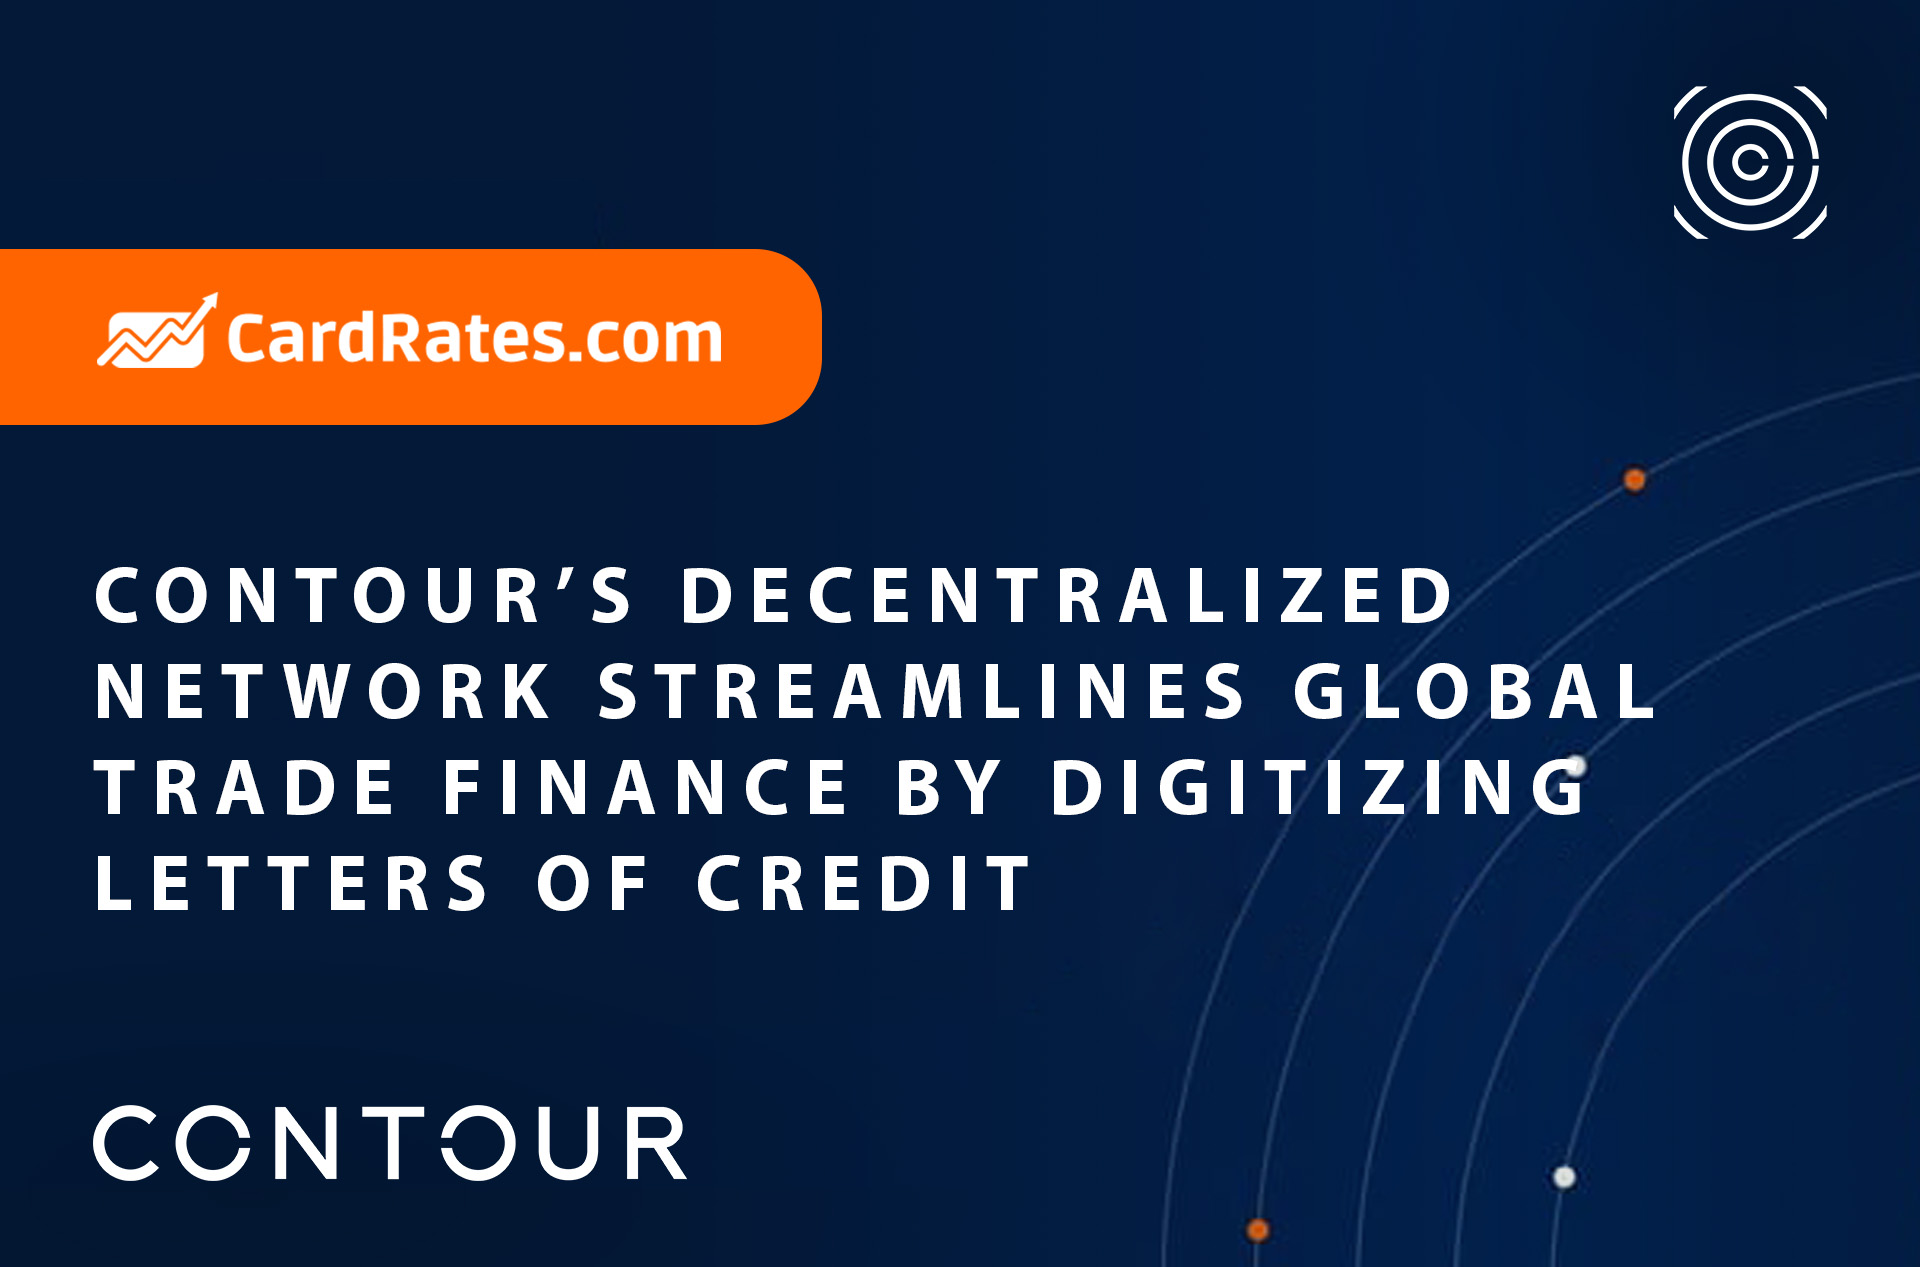 Contour’s Decentralized Network Streamlines Global Trade Finance by Digitizing Letters of Credit